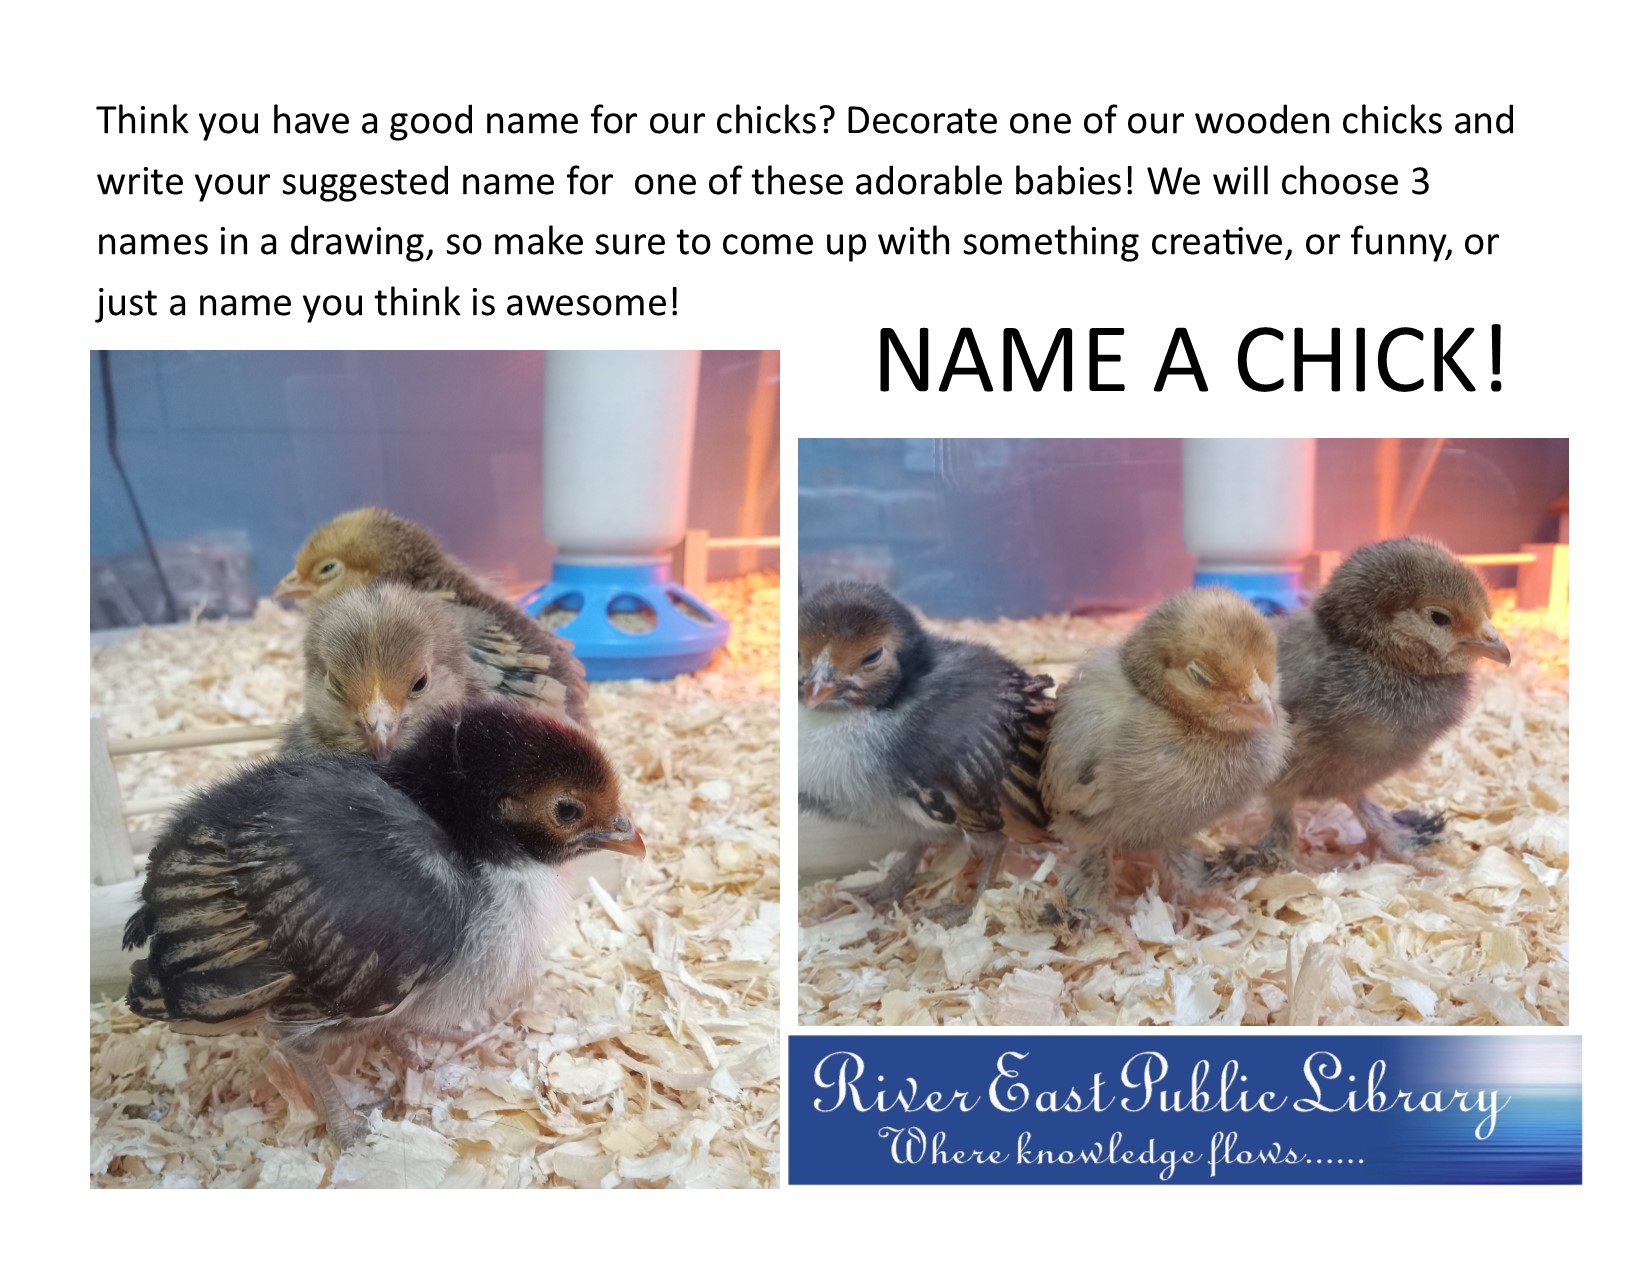 Poster asking for people to choose names for our adorable new baby chicks